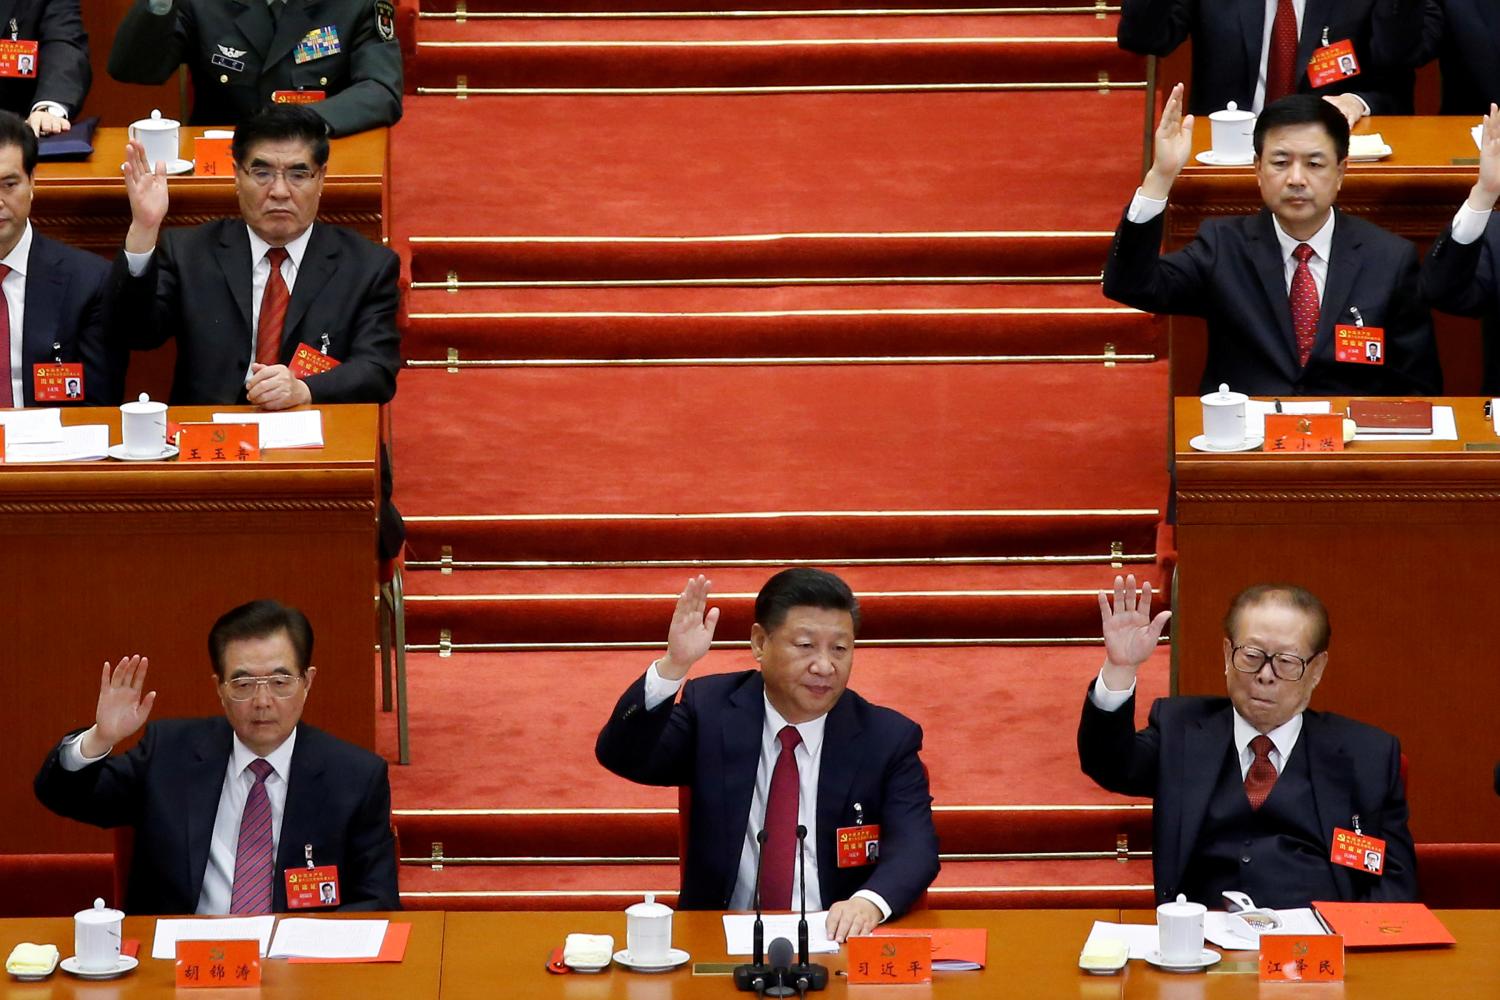 (L to R) Former Chinese president Hu Jintao, Chinese President Xi Jinping and former Chinese president Jiang Zemin raise their hands as they take a vote at the closing session of the 19th National Congress of the Communist Party of China, in Beijing, China October 24, 2017. REUTERS/Thomas Peter TPX IMAGES OF THE DAY - RC186FB9D730